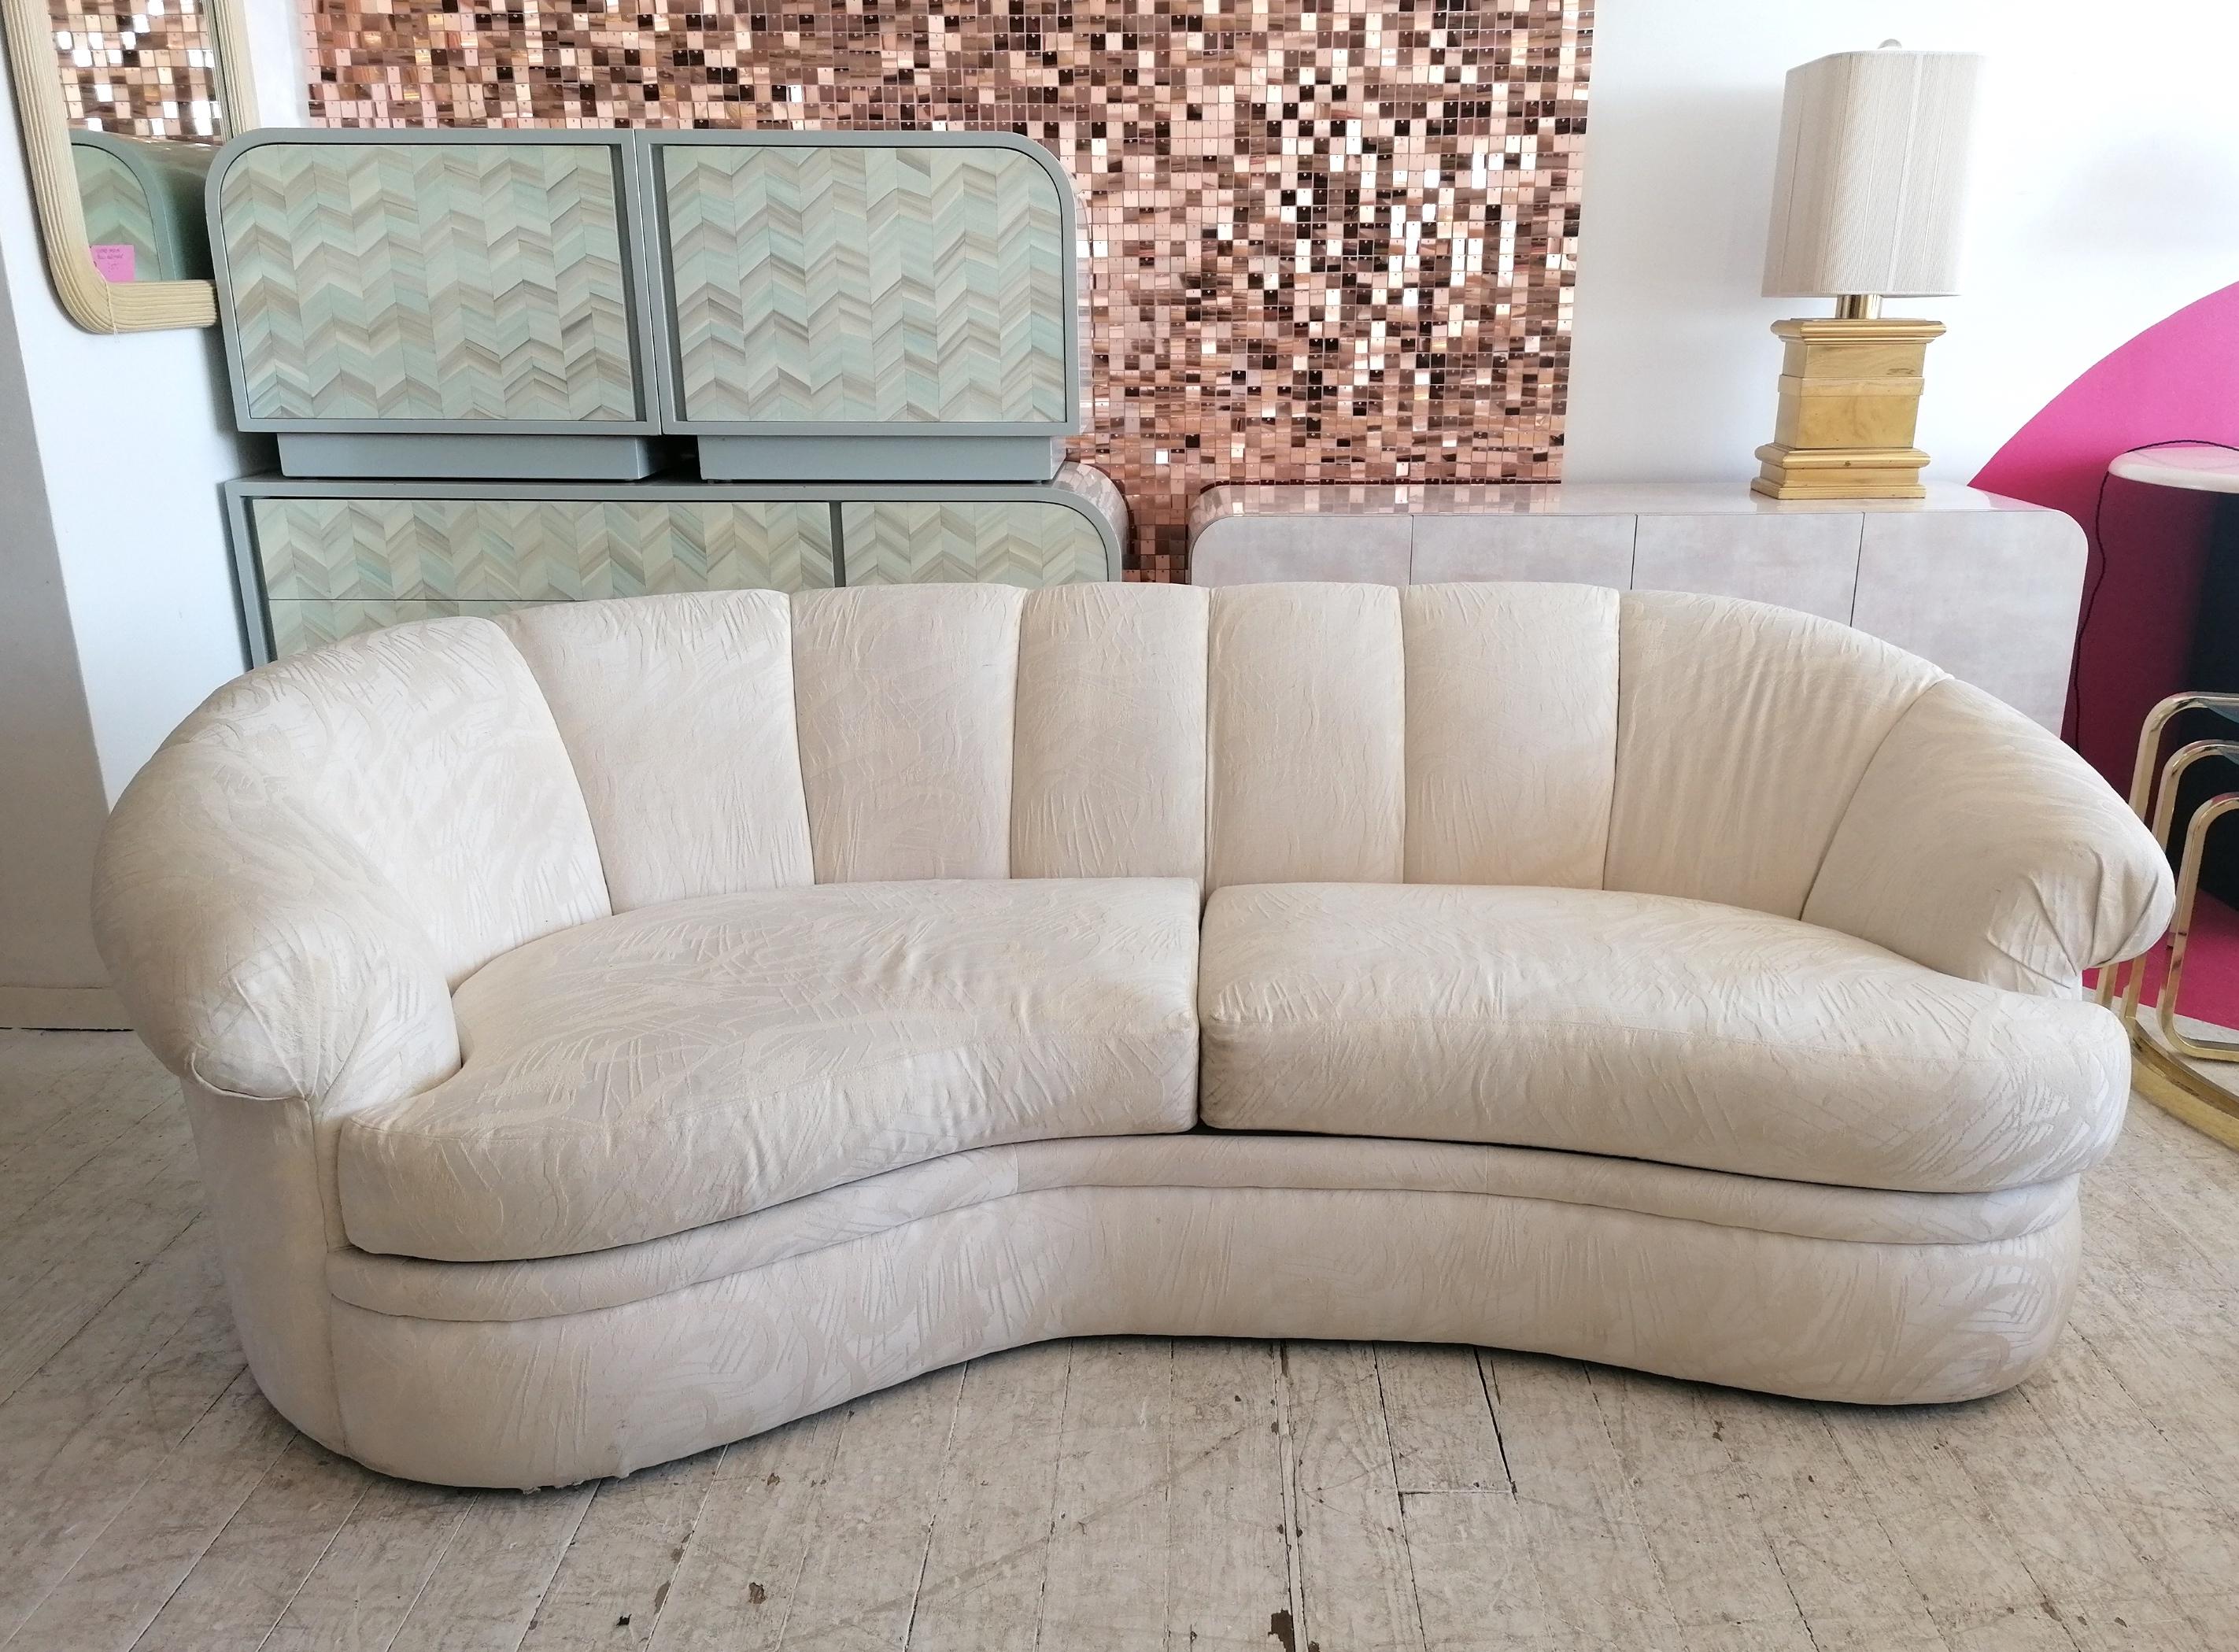  A curved, asymmetric sofa by Thayer Coggin, USA 1980s.
Really comfortable. The ivory abstract-textured upholstery has a few light marks but overall is in really good condition.

Dimensions: width 218cm, depth at left 104cm, depth at right 97cm,